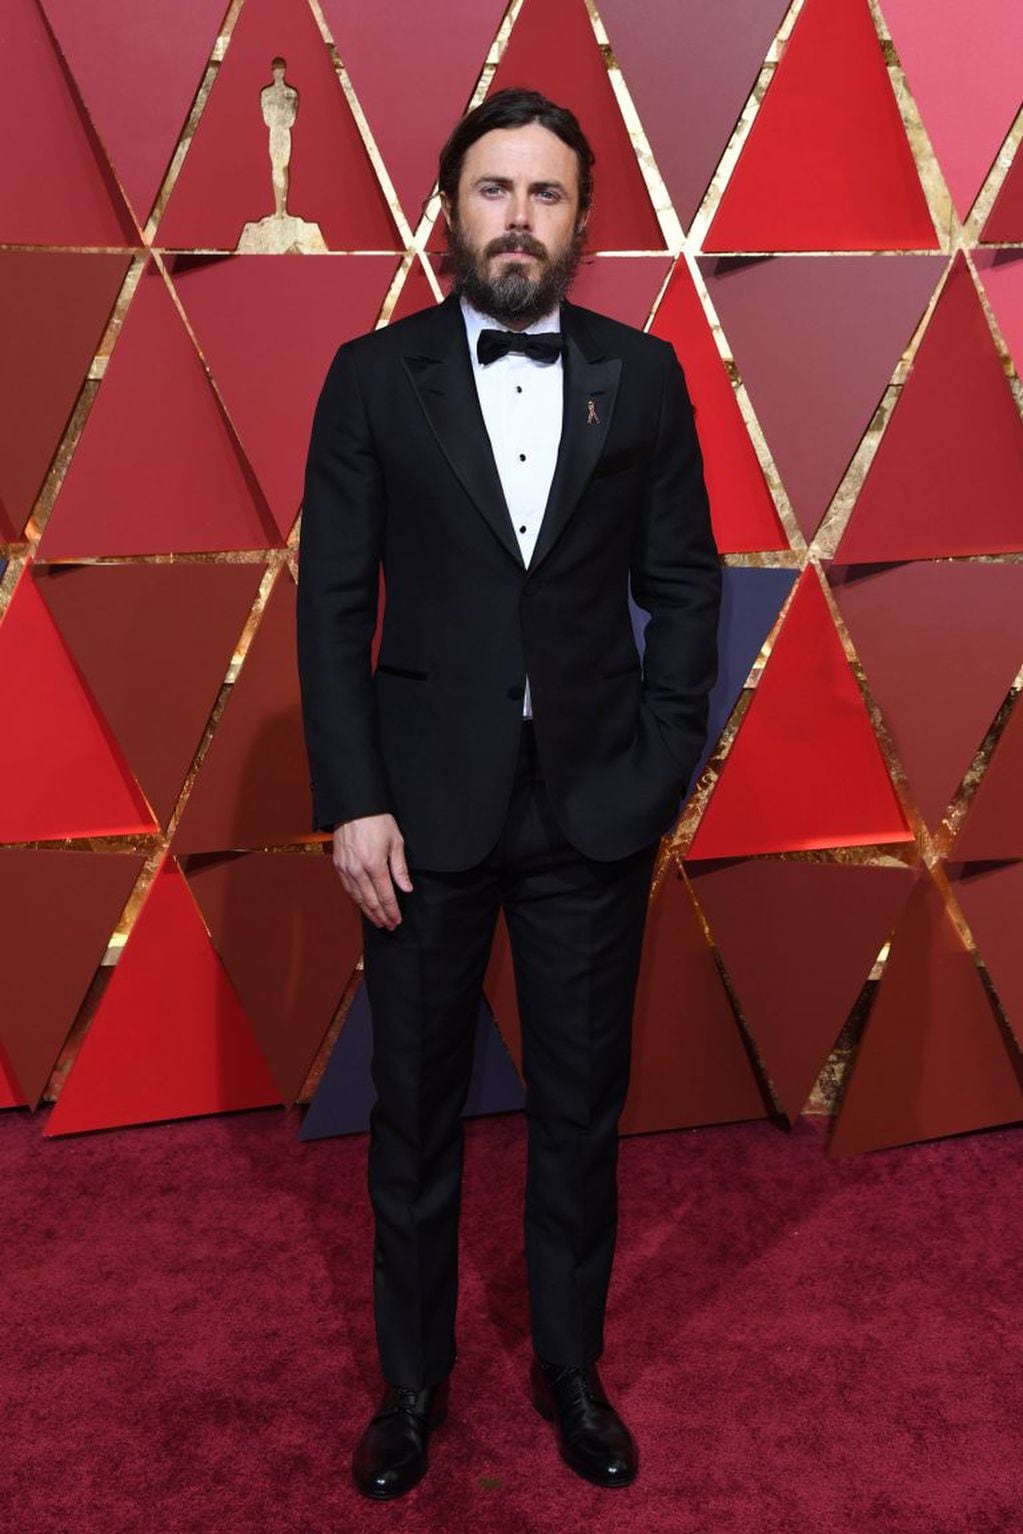 Nominee for Best actor in "Manchester By The Sea" Casey Affleck poses as he arrives on the red carpet for the 89th Oscars on February 26, 2017 in Hollywood, California.  / AFP PHOTO / ANGELA WEISS